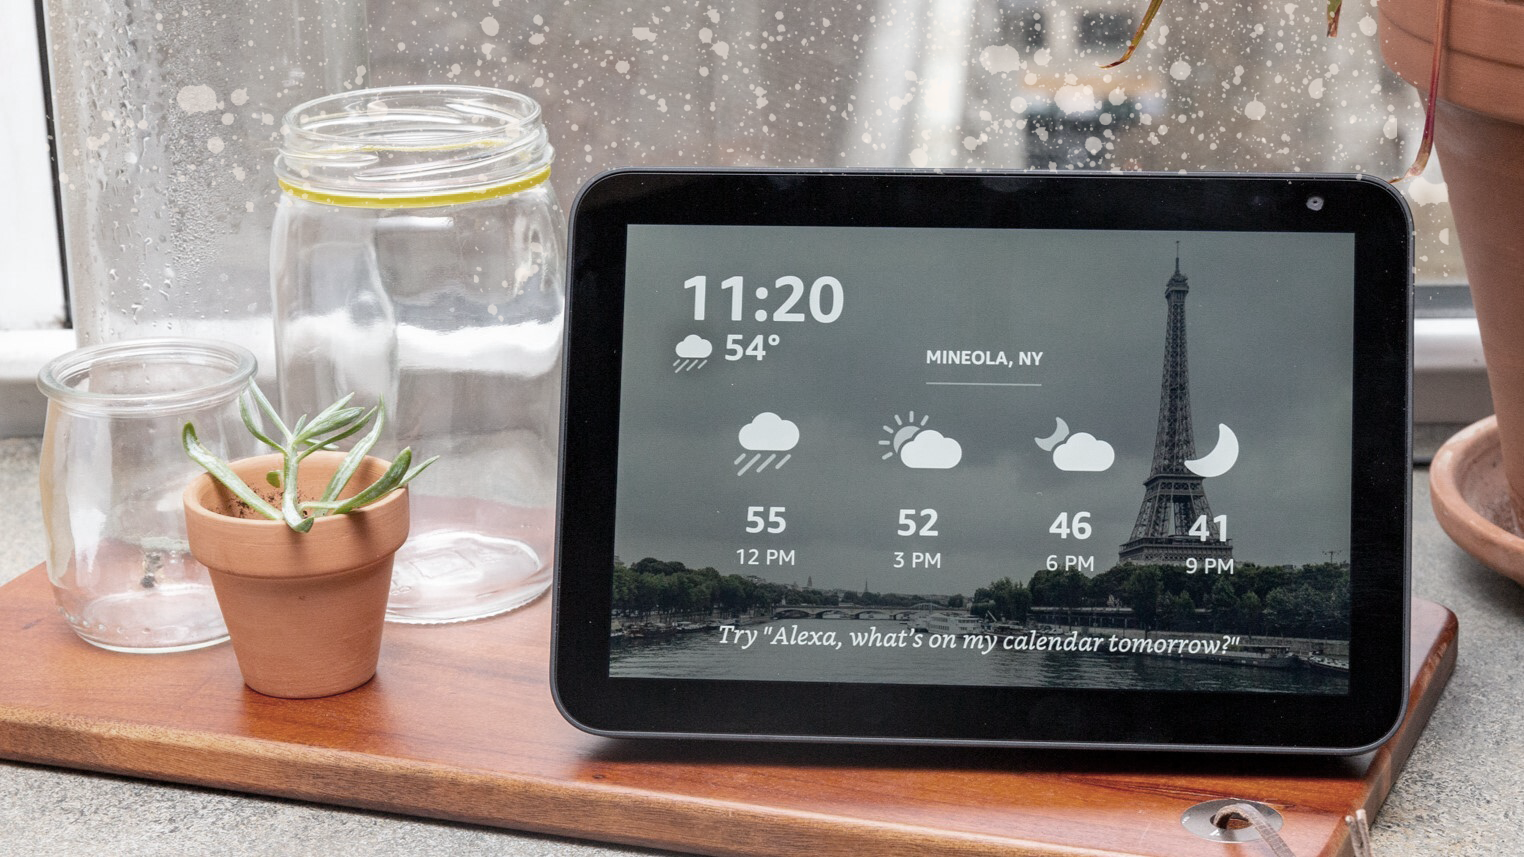 8 things we love (and hate) about the Google Nest Hub 2